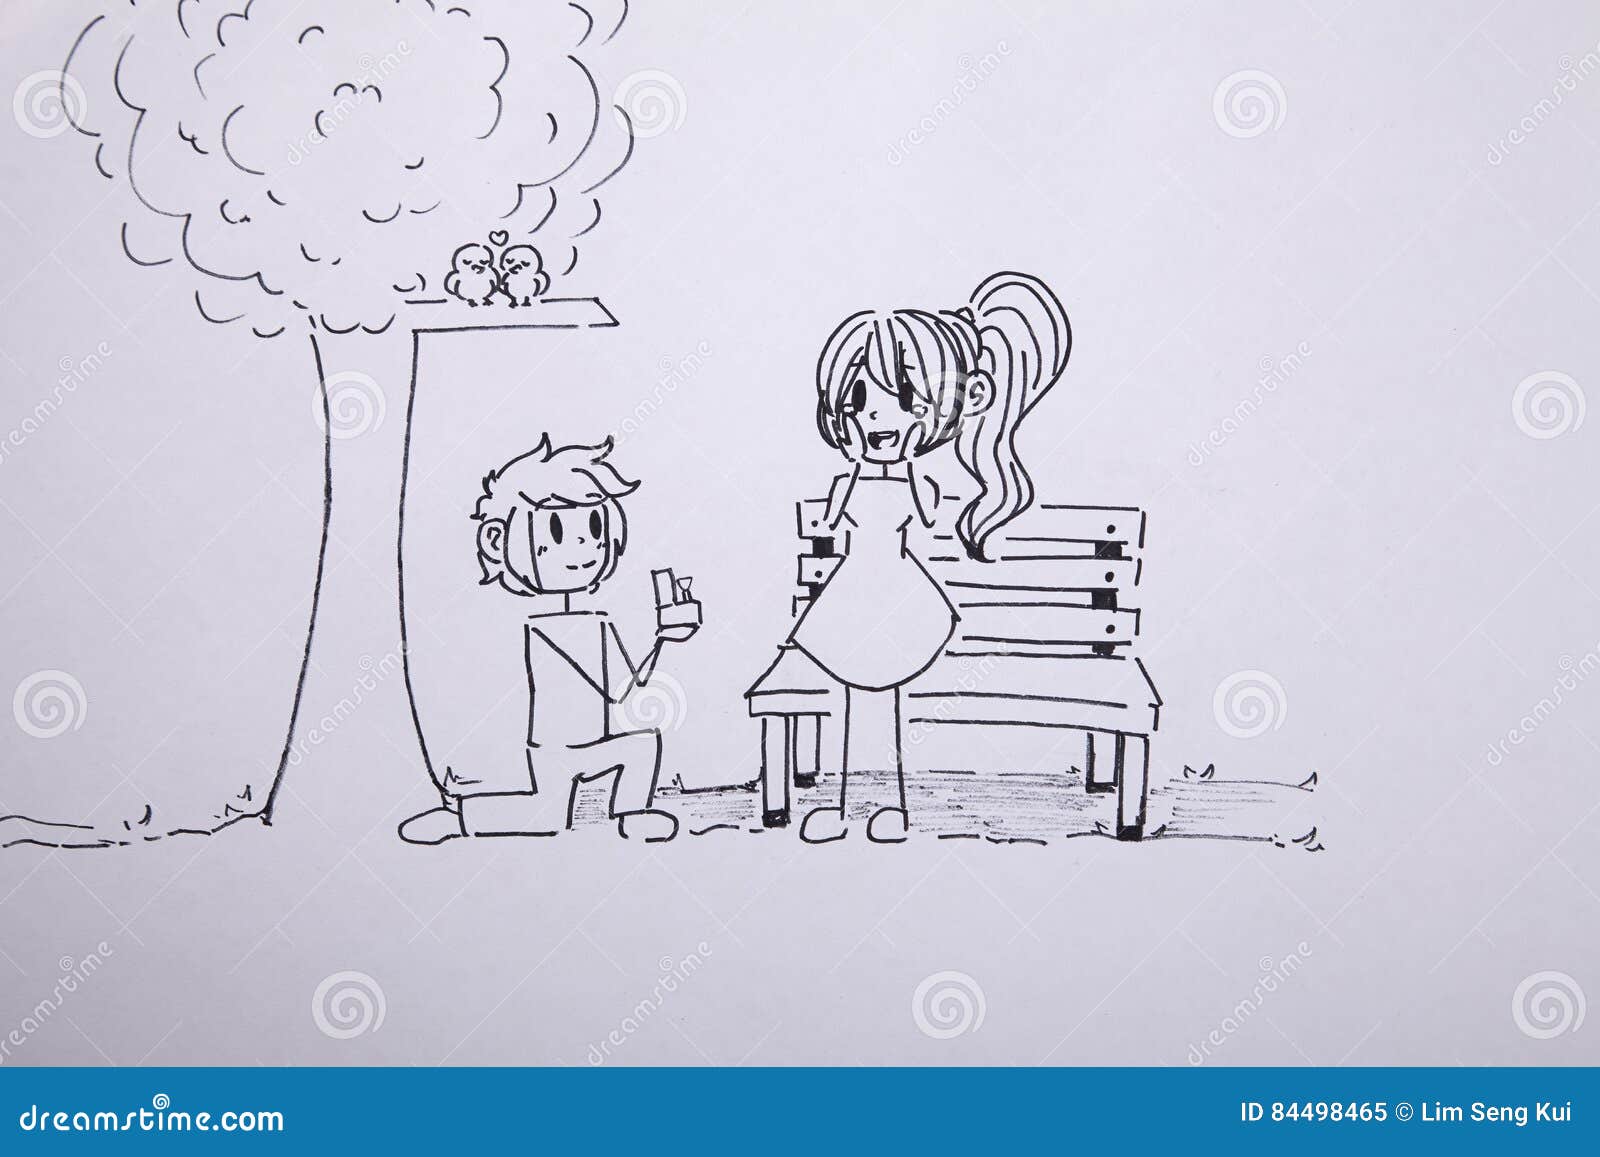 42 Simple Pencil Sketches Of Couples In Love  Artistic Haven